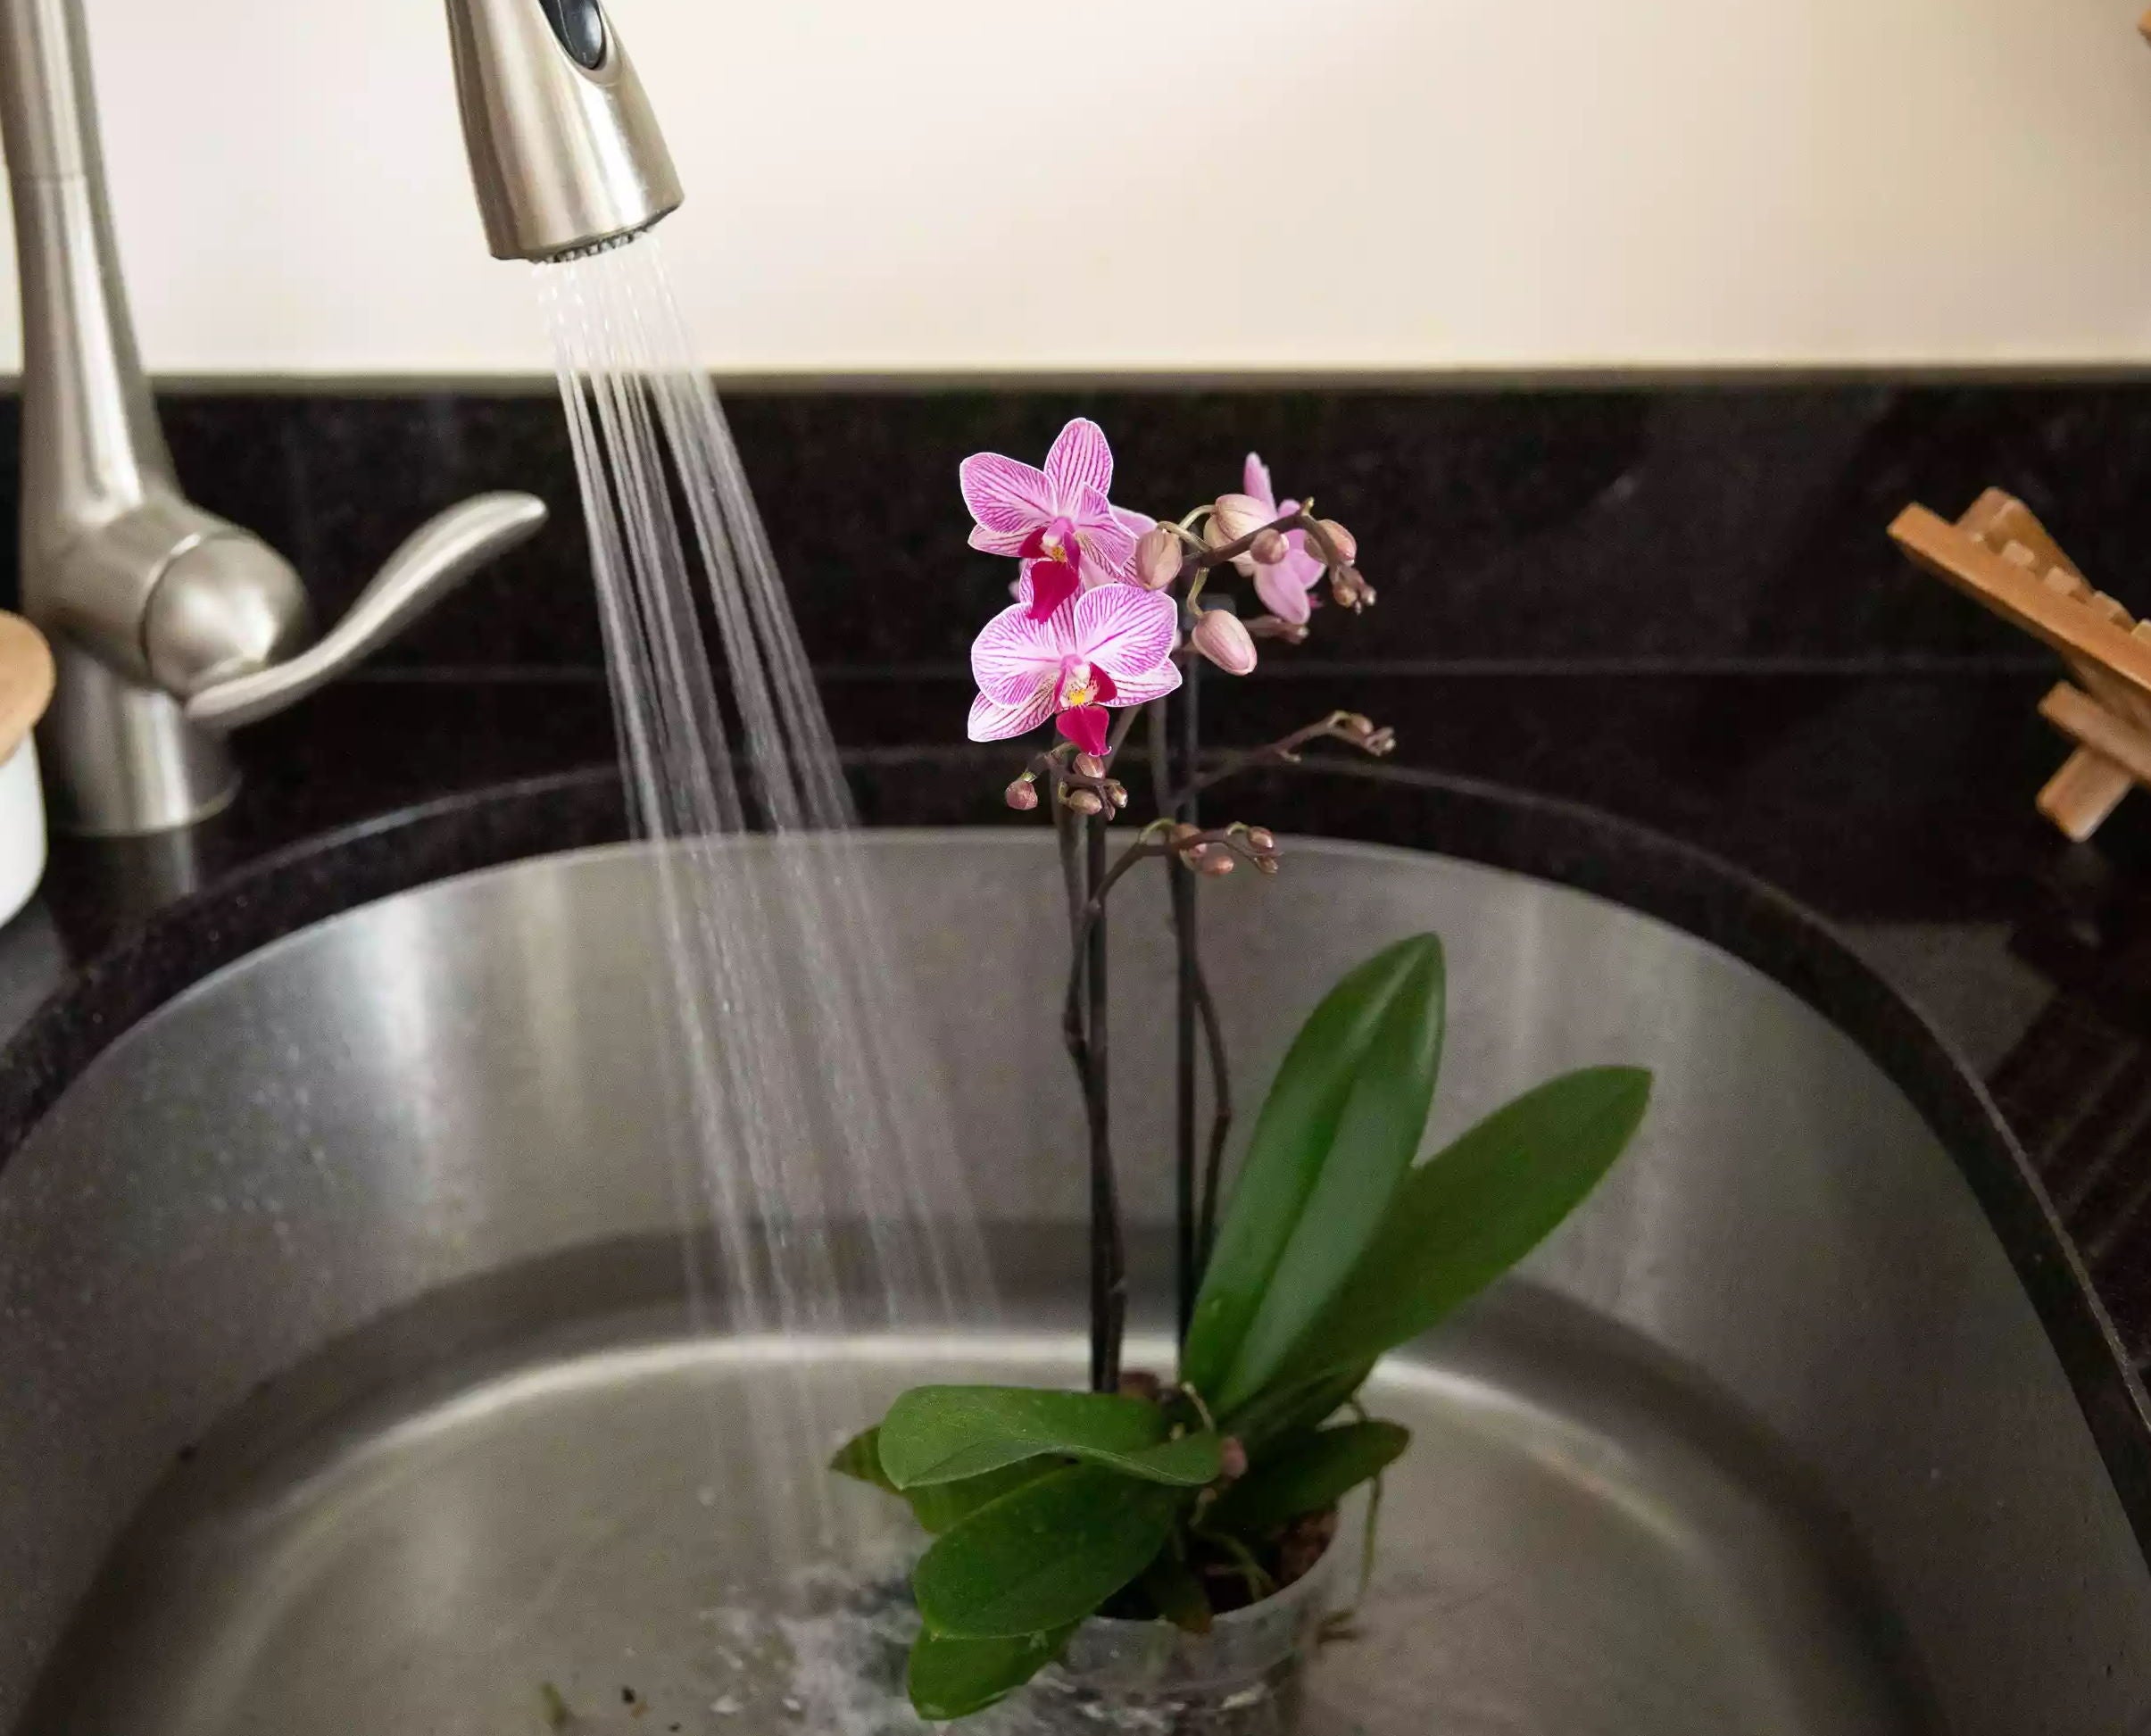 Orchids need a bath every now and then